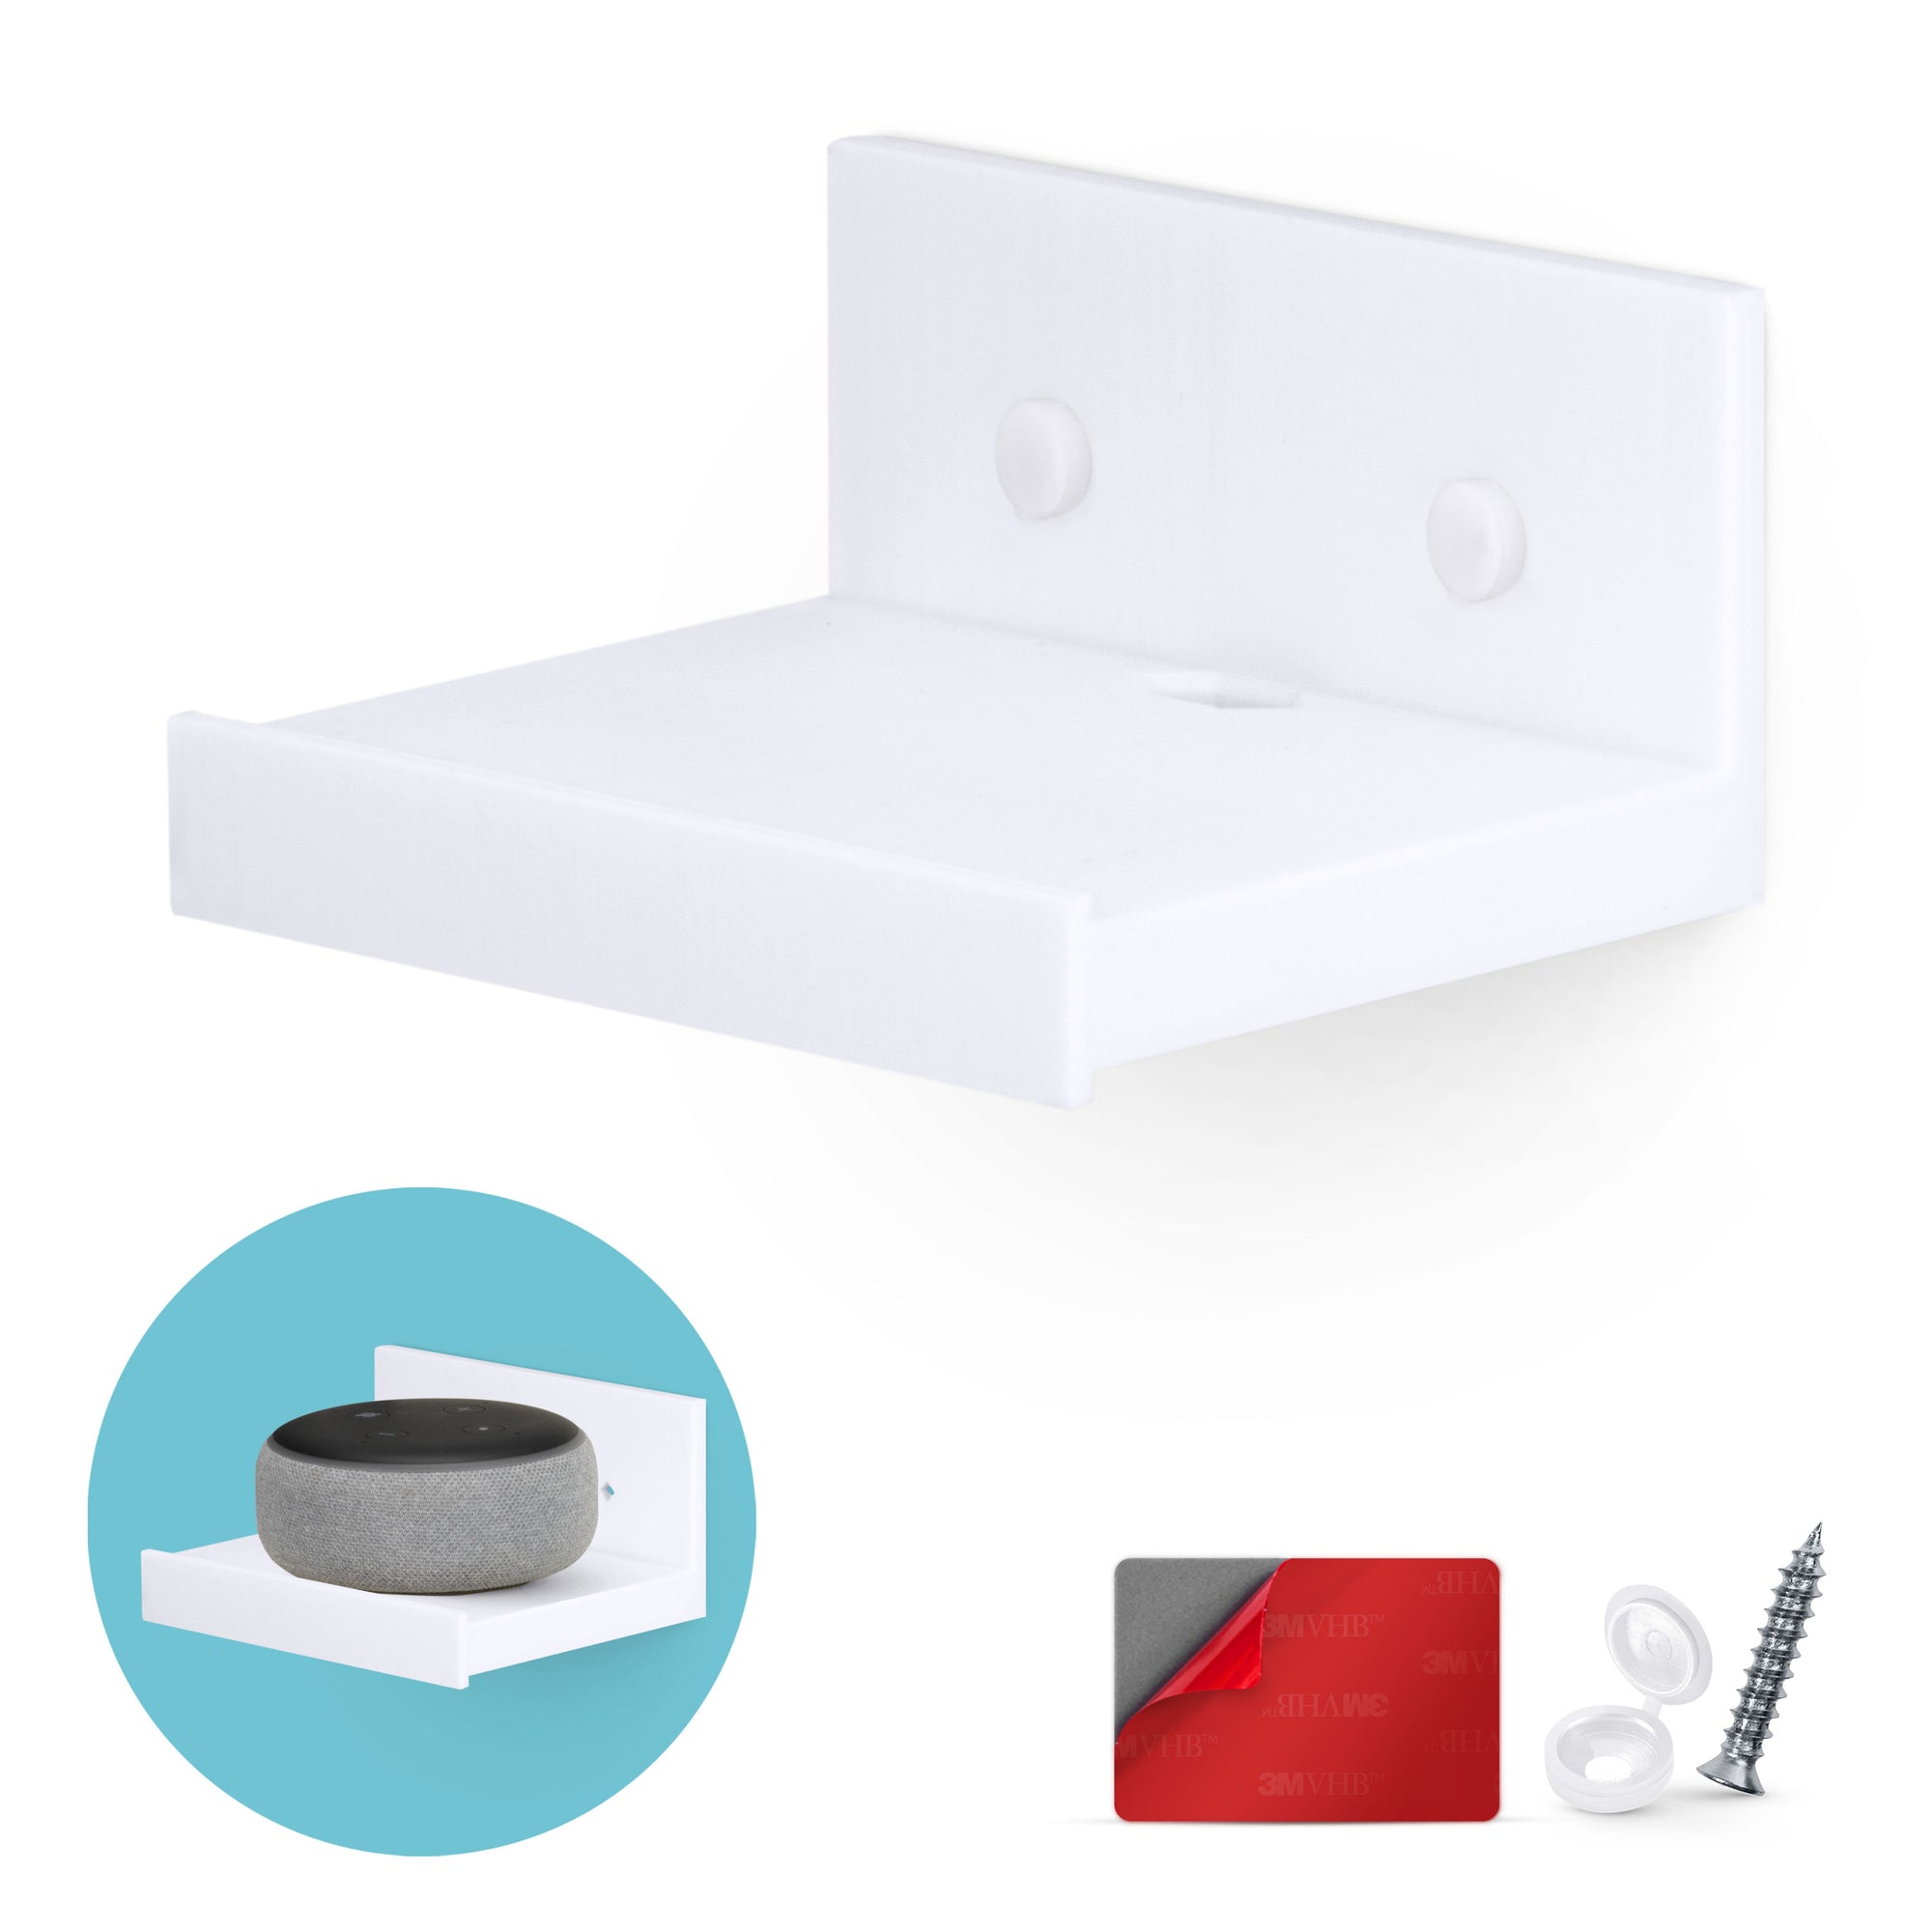 5” Small Floating Shelf, Adhesive & Screw In, For Bluetooth Speakers, Cameras, Plants, Toys, Books & More, Easy to Install Shelves (SHELF SF2105, White)